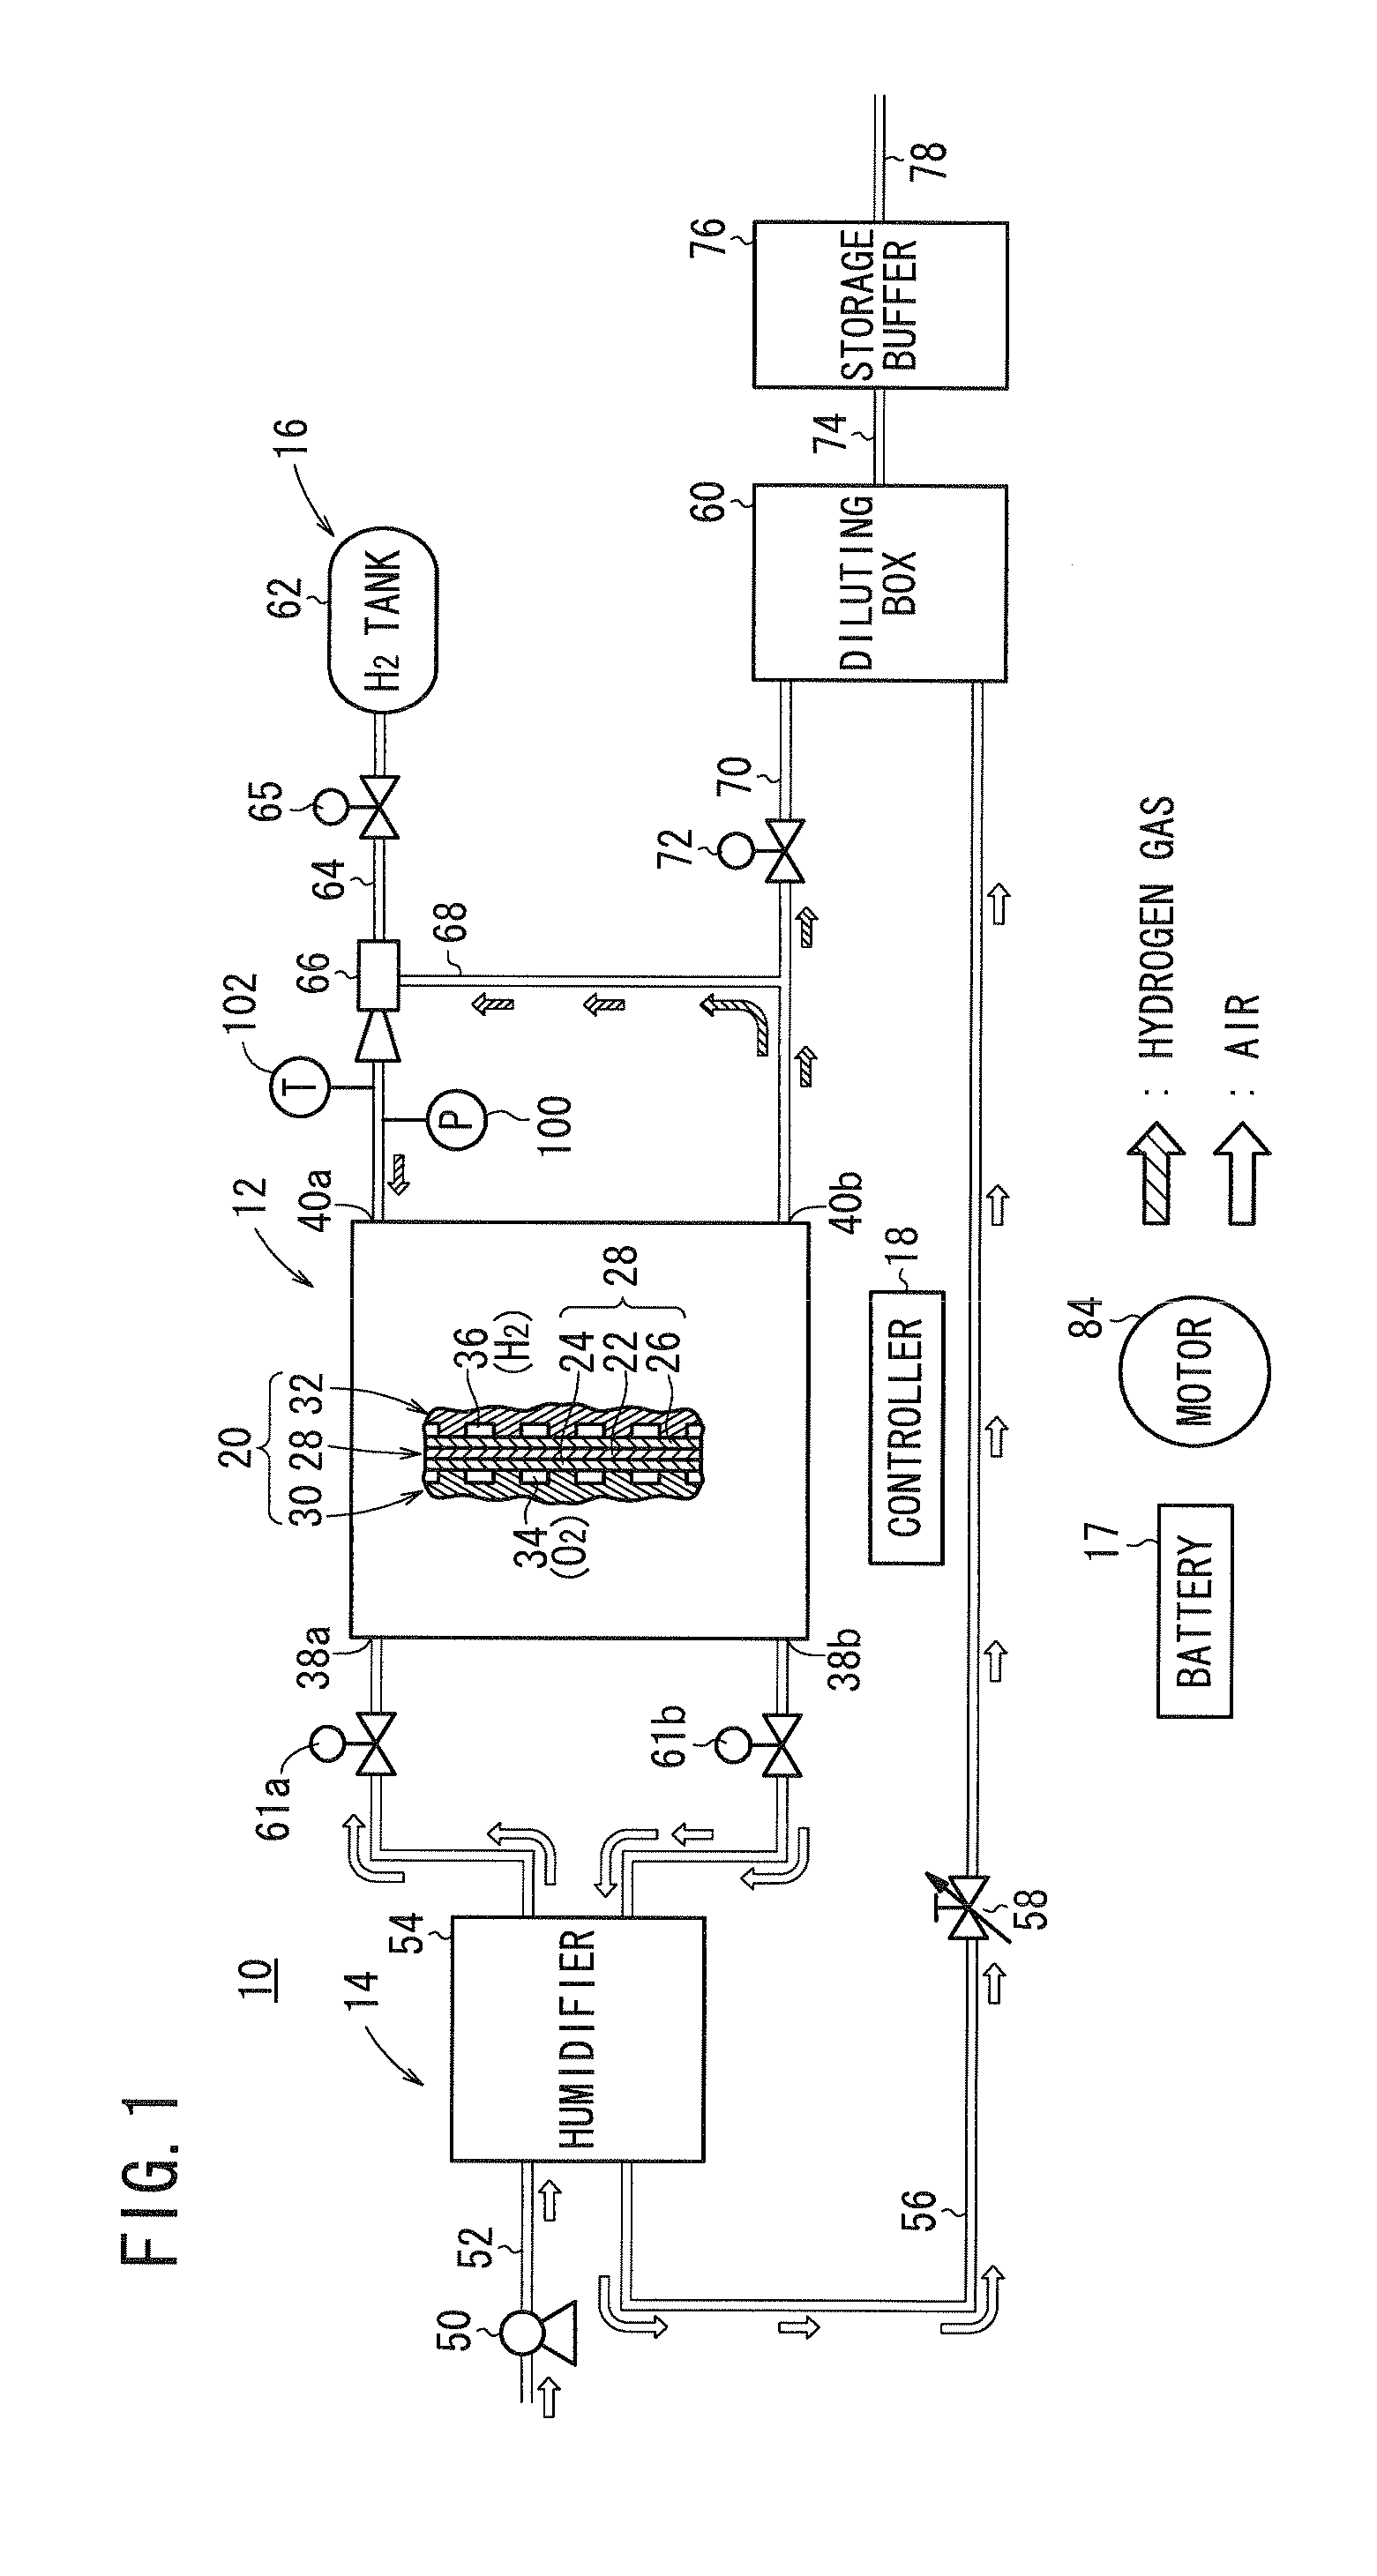 Method of shutting down fuel cell system